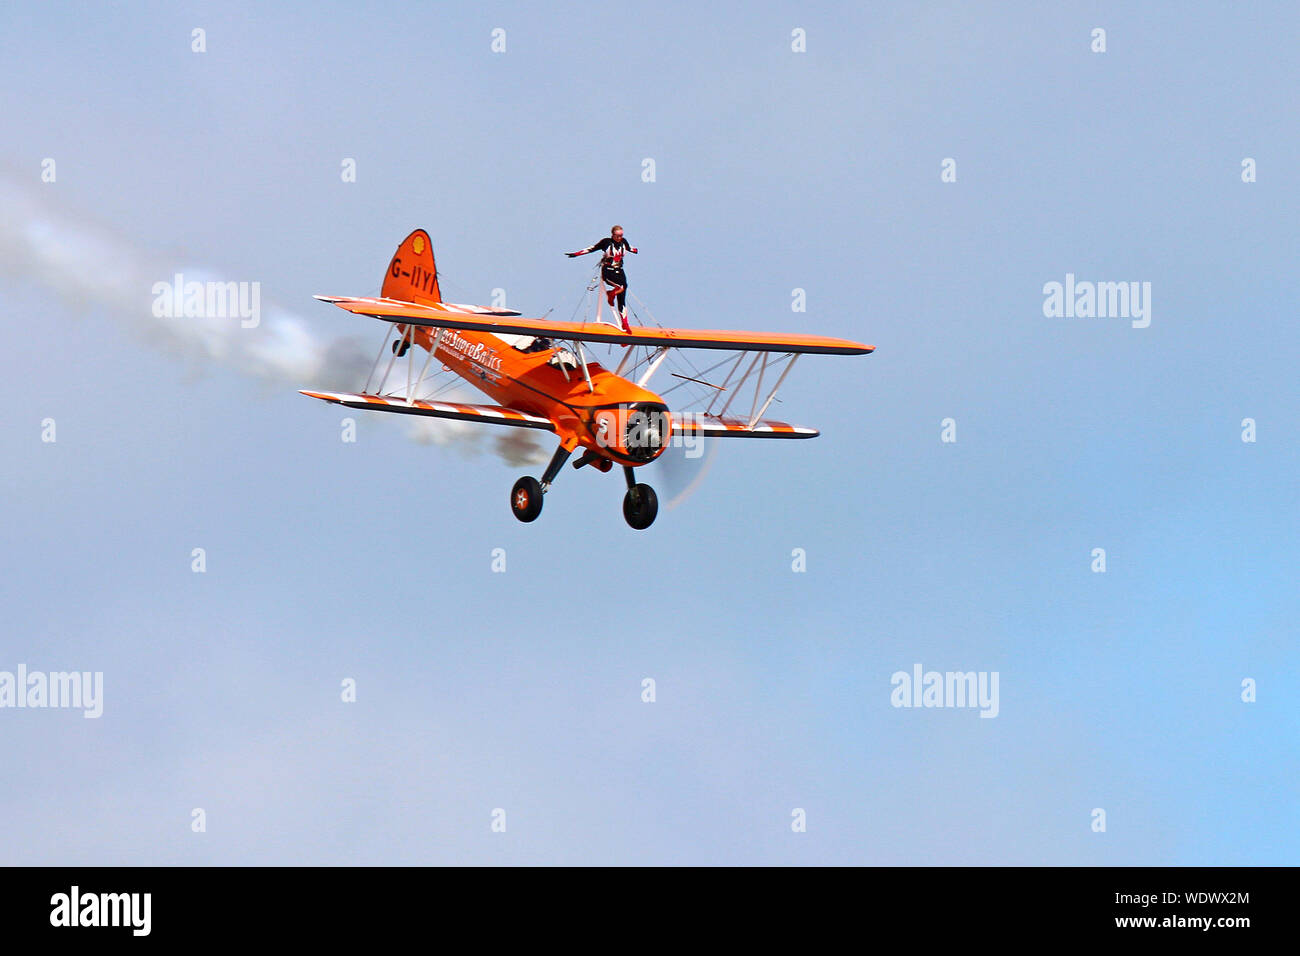 Part of the Aerosuperbatics Wingwalkers this 1940's biplane with the young lady strapped on top wows the crowd at Eastbourne's International Airshow. Stock Photo